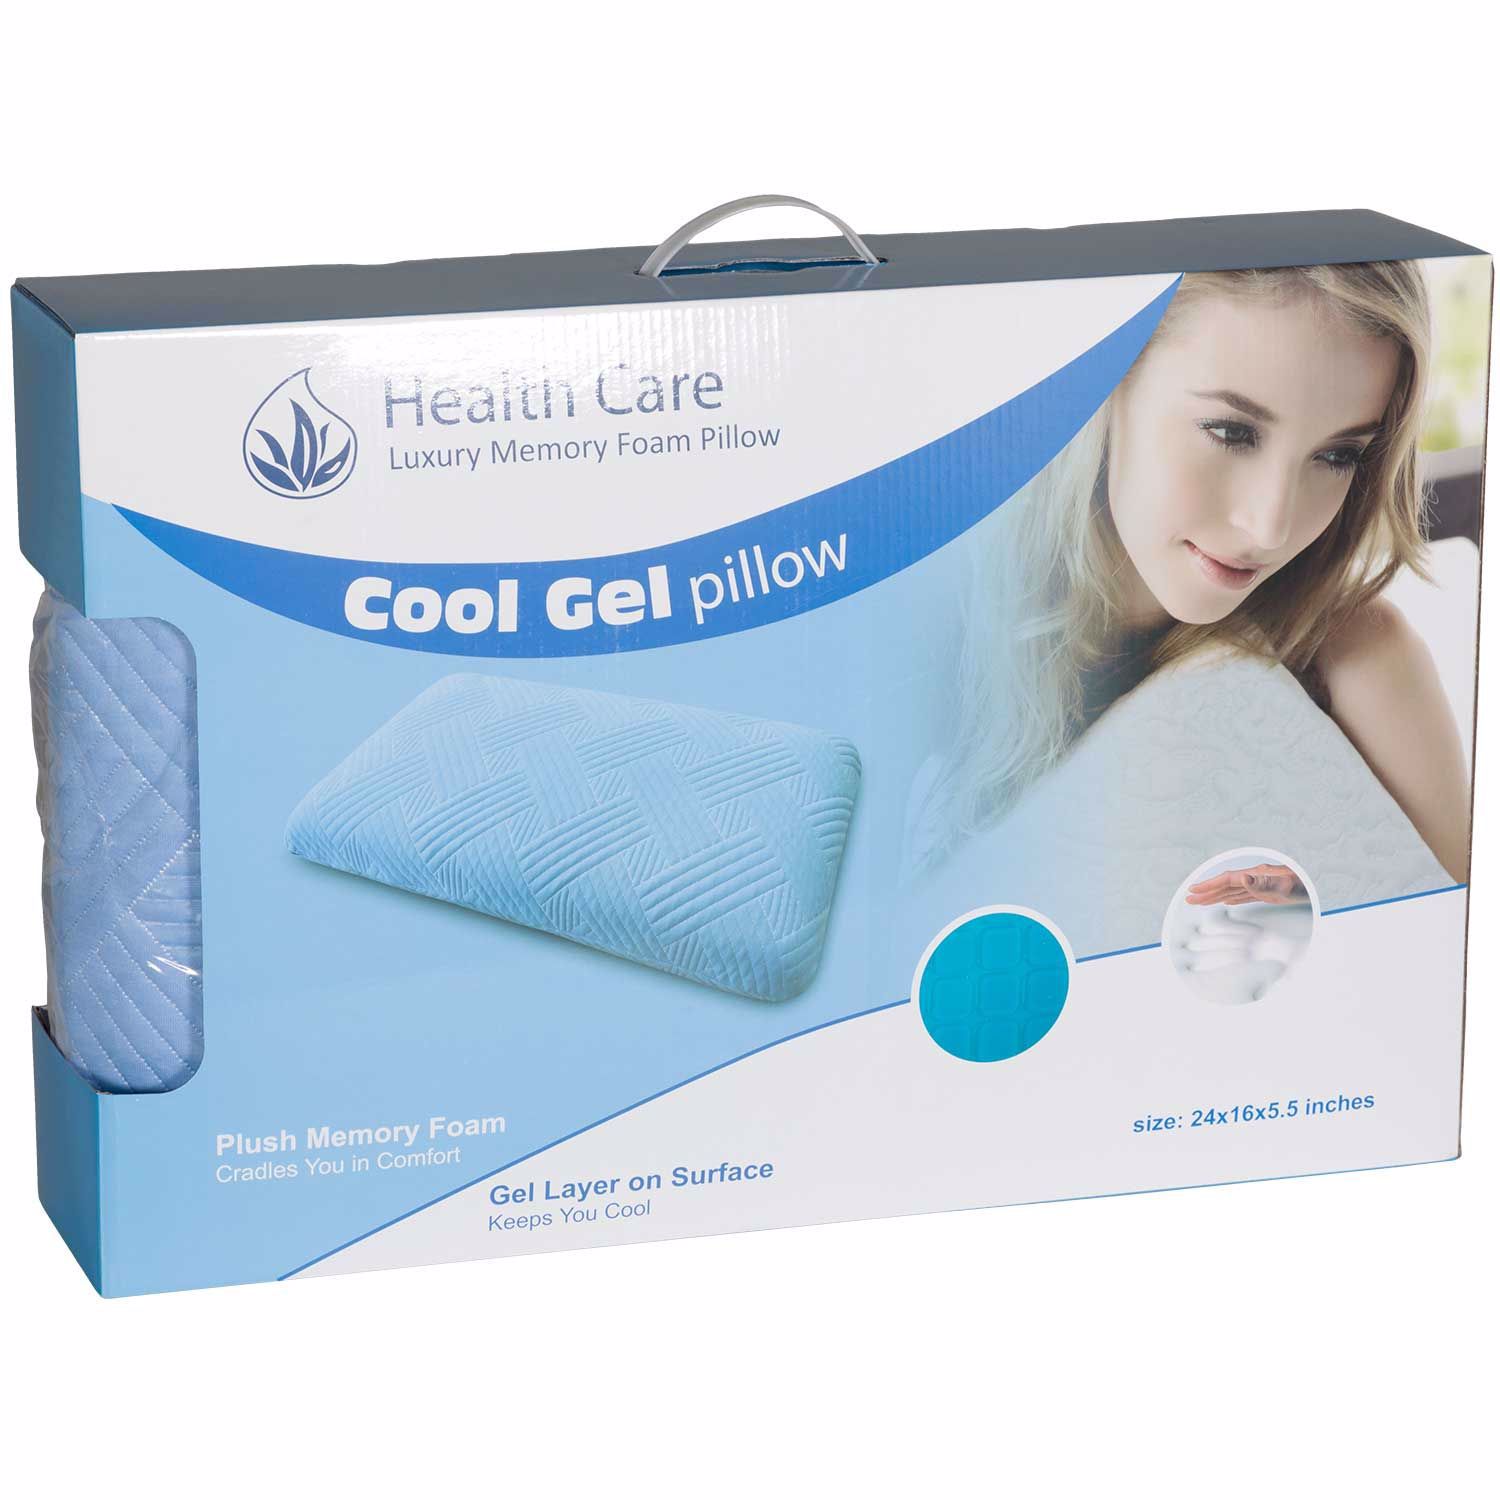 Pillows King Size Set of 2 - Cooling Memory Foam Pillows, Gel Infused Cool  Pillo